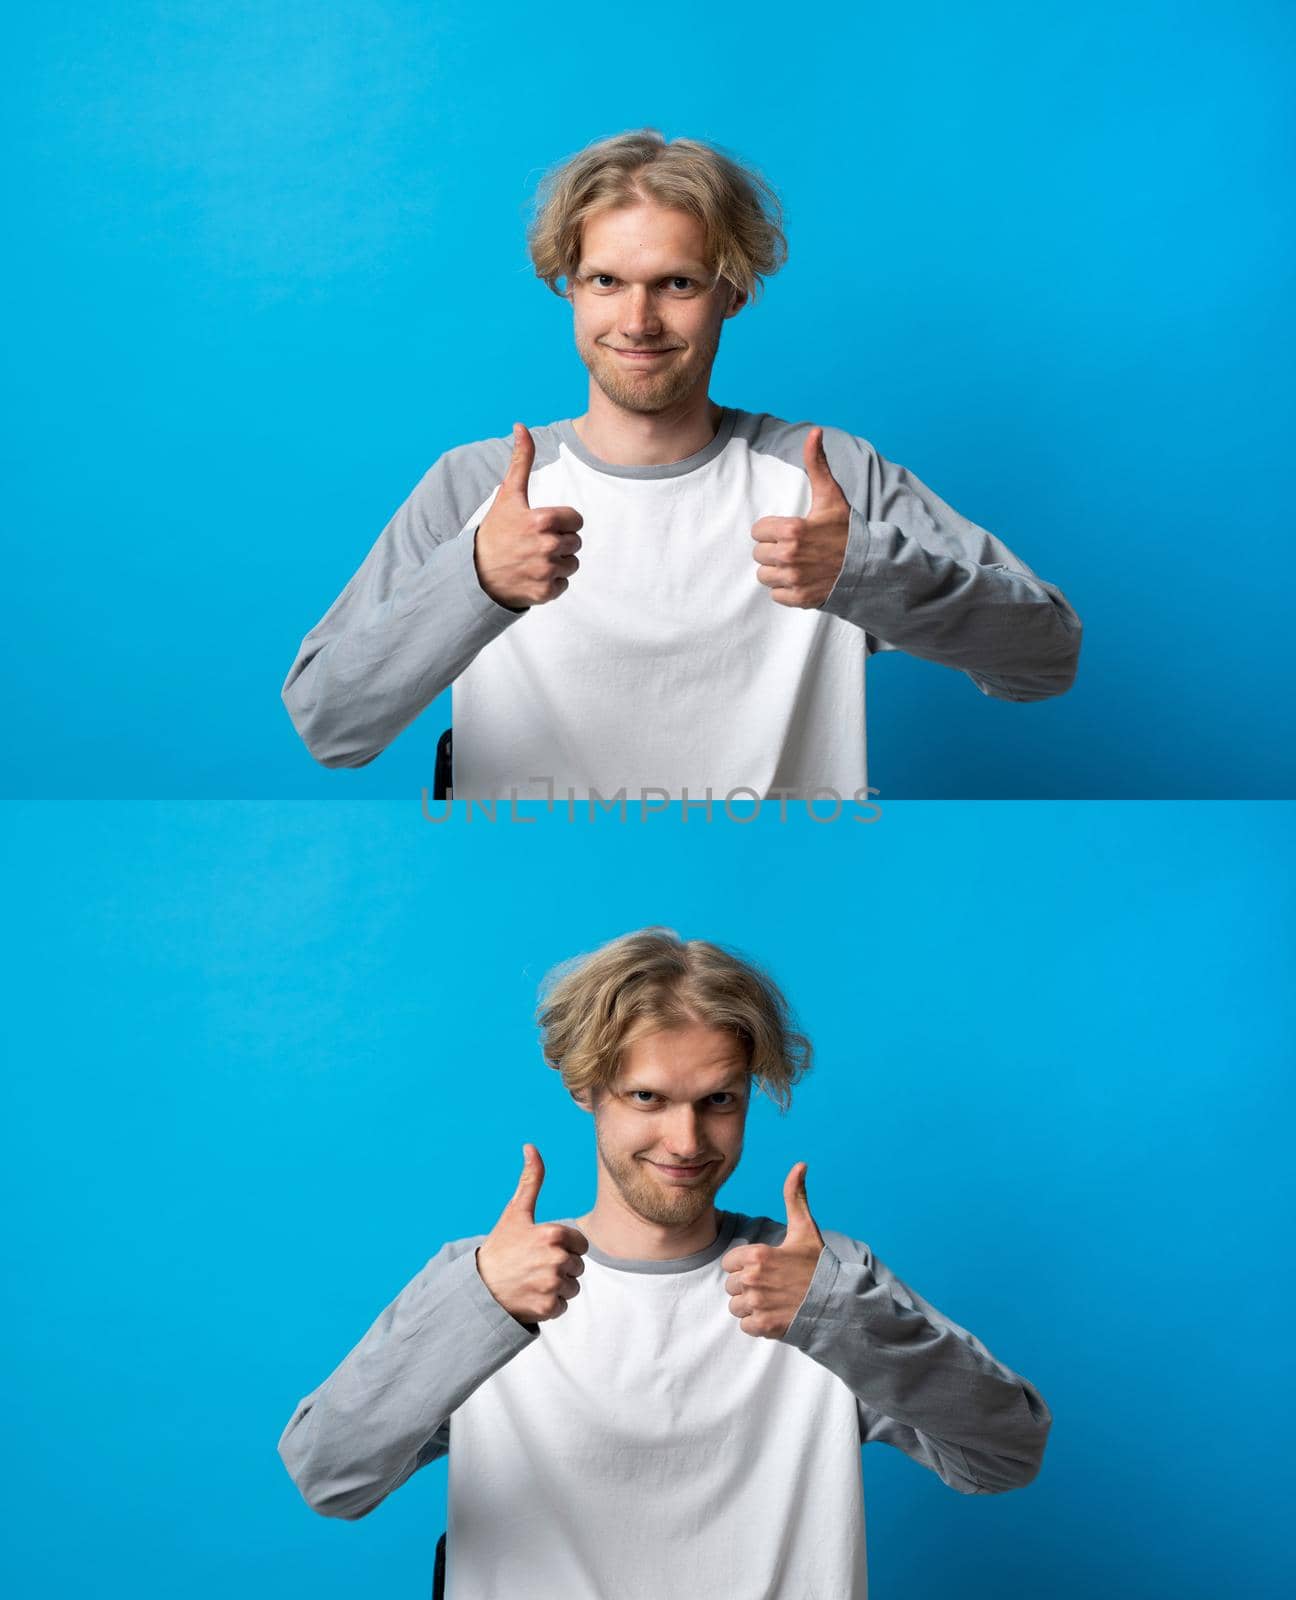 Nice job man, like it. set of two photo pleased good-looking happy man showing thumbs up and smiling broadly, giving positive feedback, sharing his positive opinion over blue wall